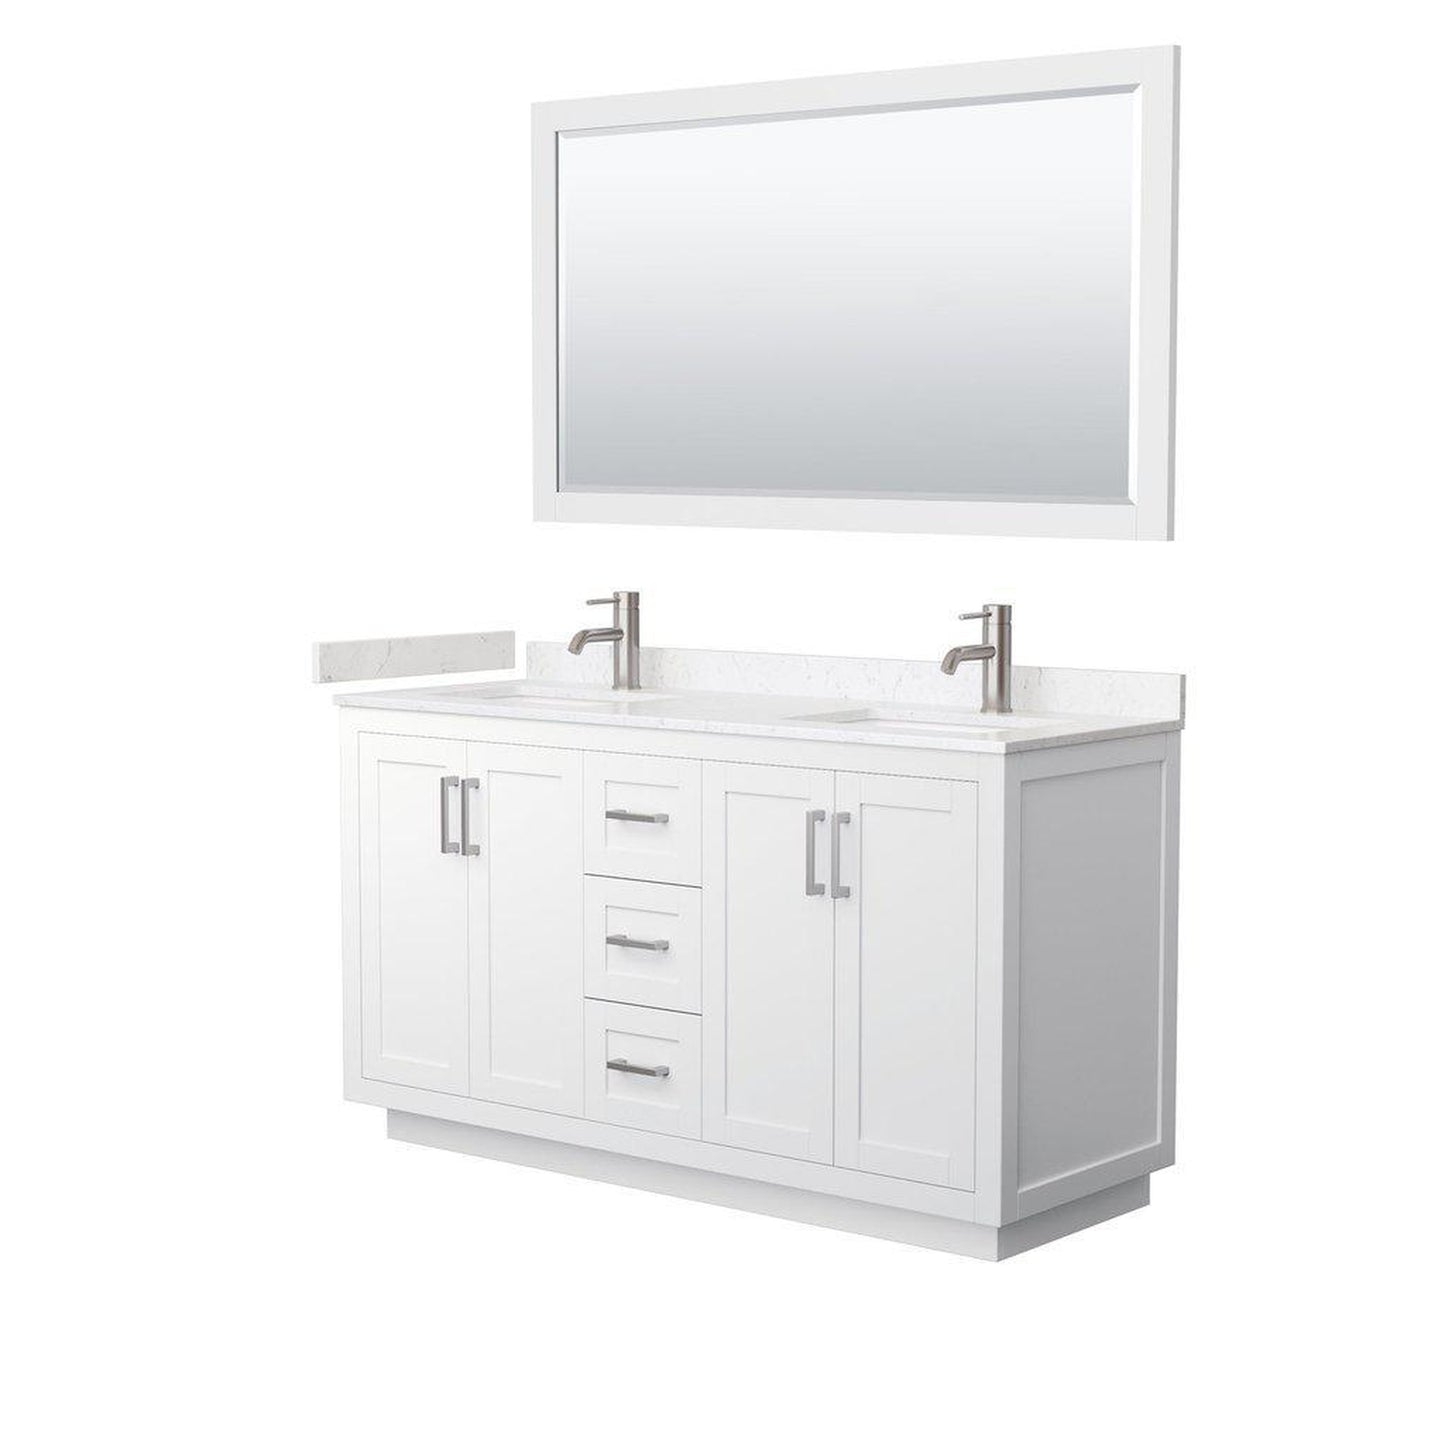 Wyndham Collection Miranda 60" Double Bathroom White Vanity Set With Light-Vein Carrara Cultured Marble Countertop, Undermount Square Sink, 58" Mirror And Brushed Nickel Trim